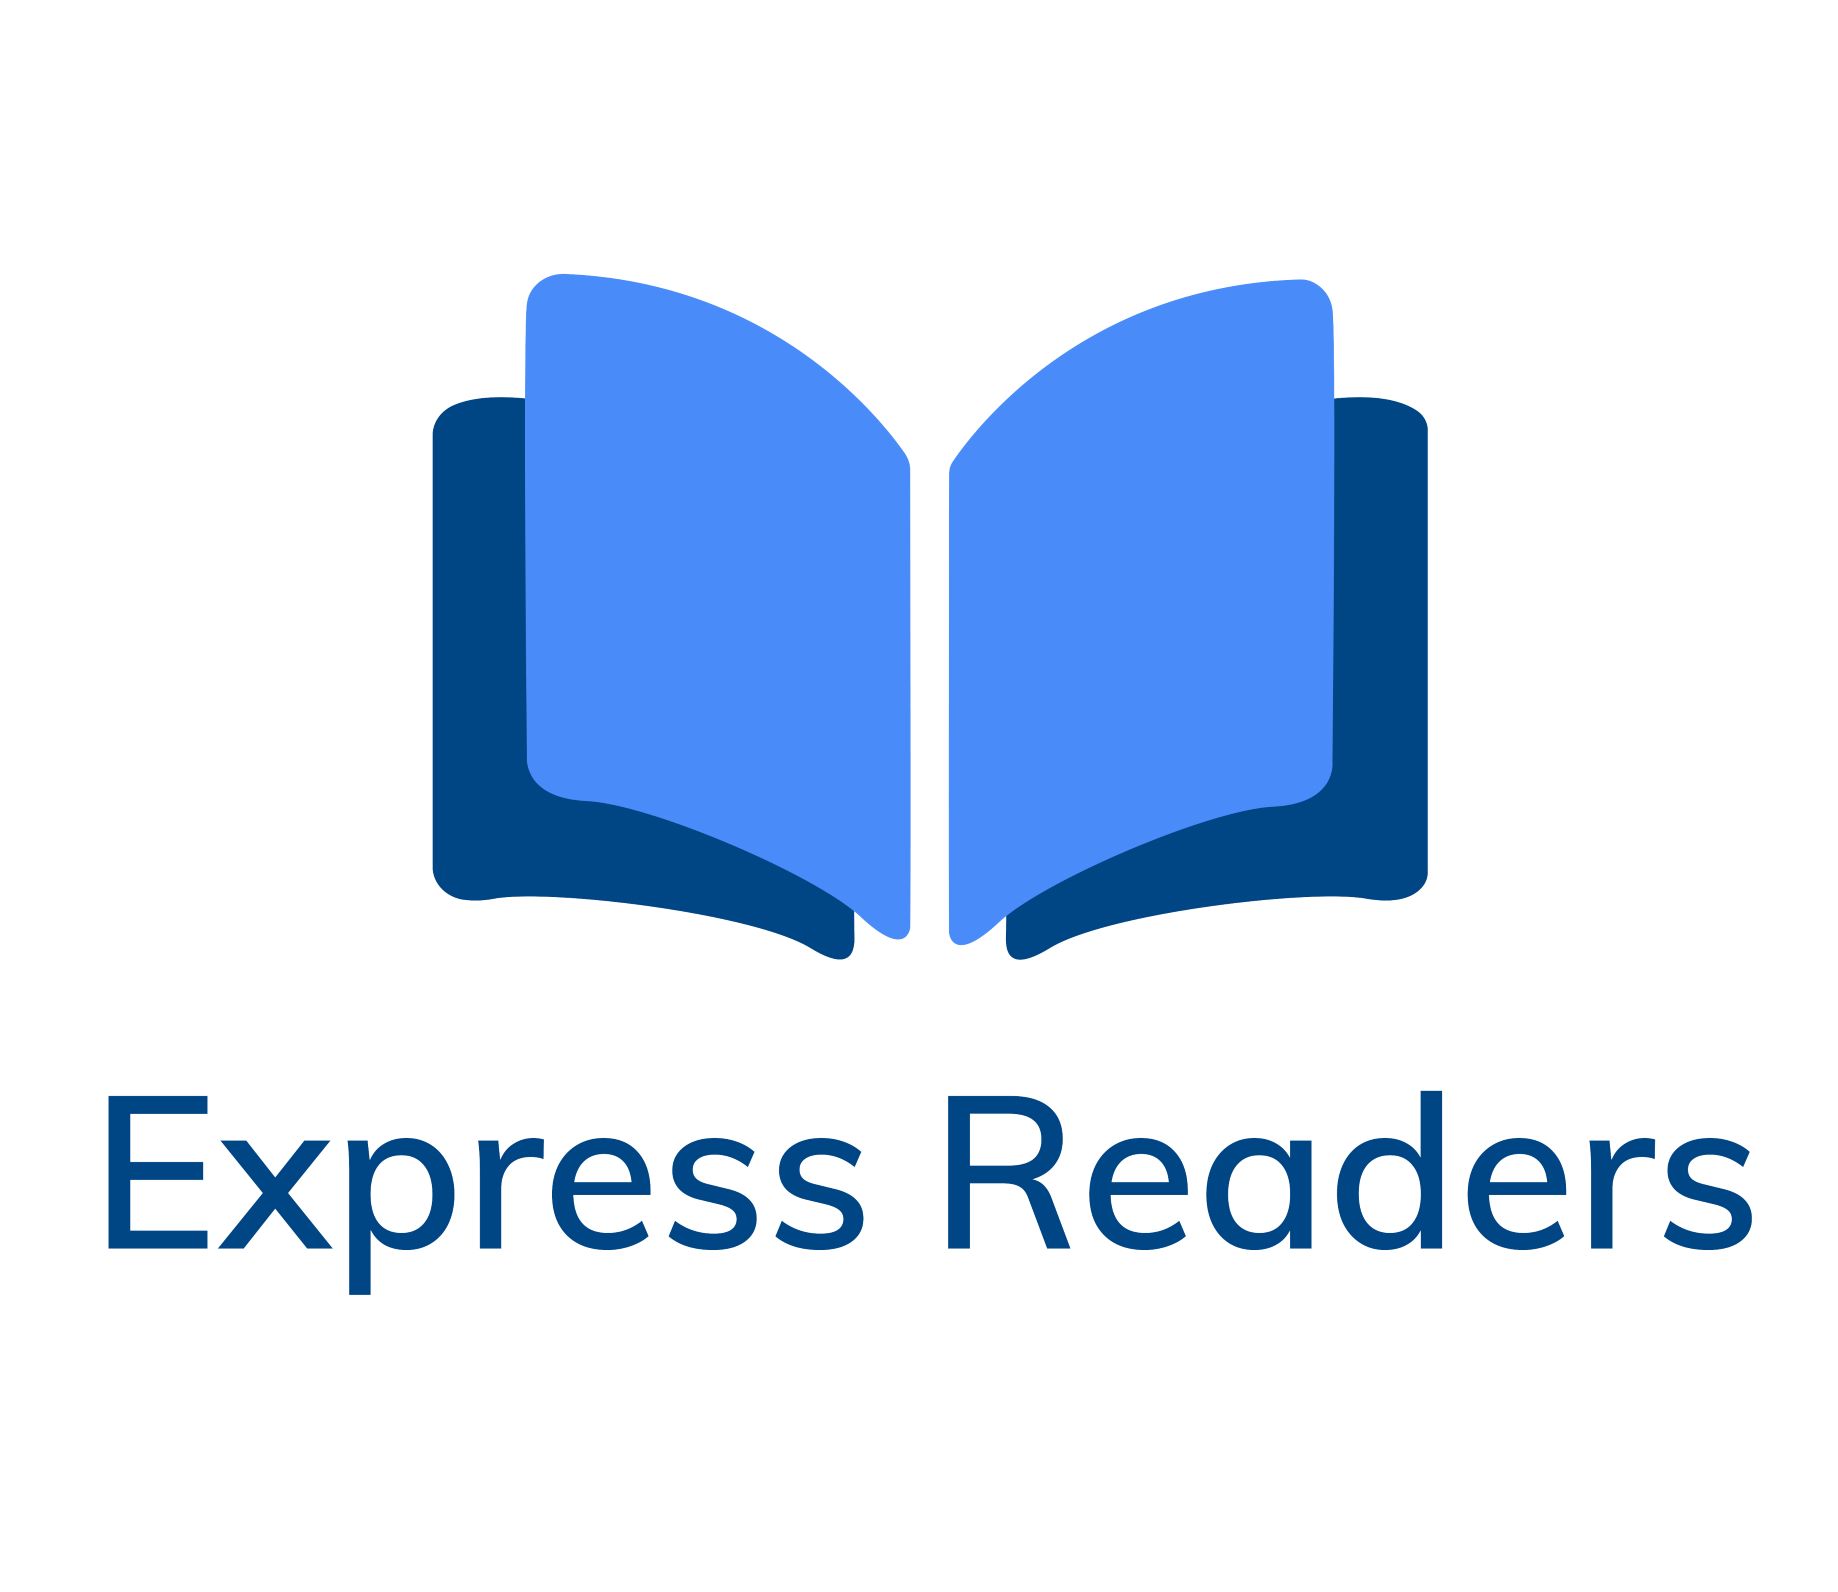 Express Readers